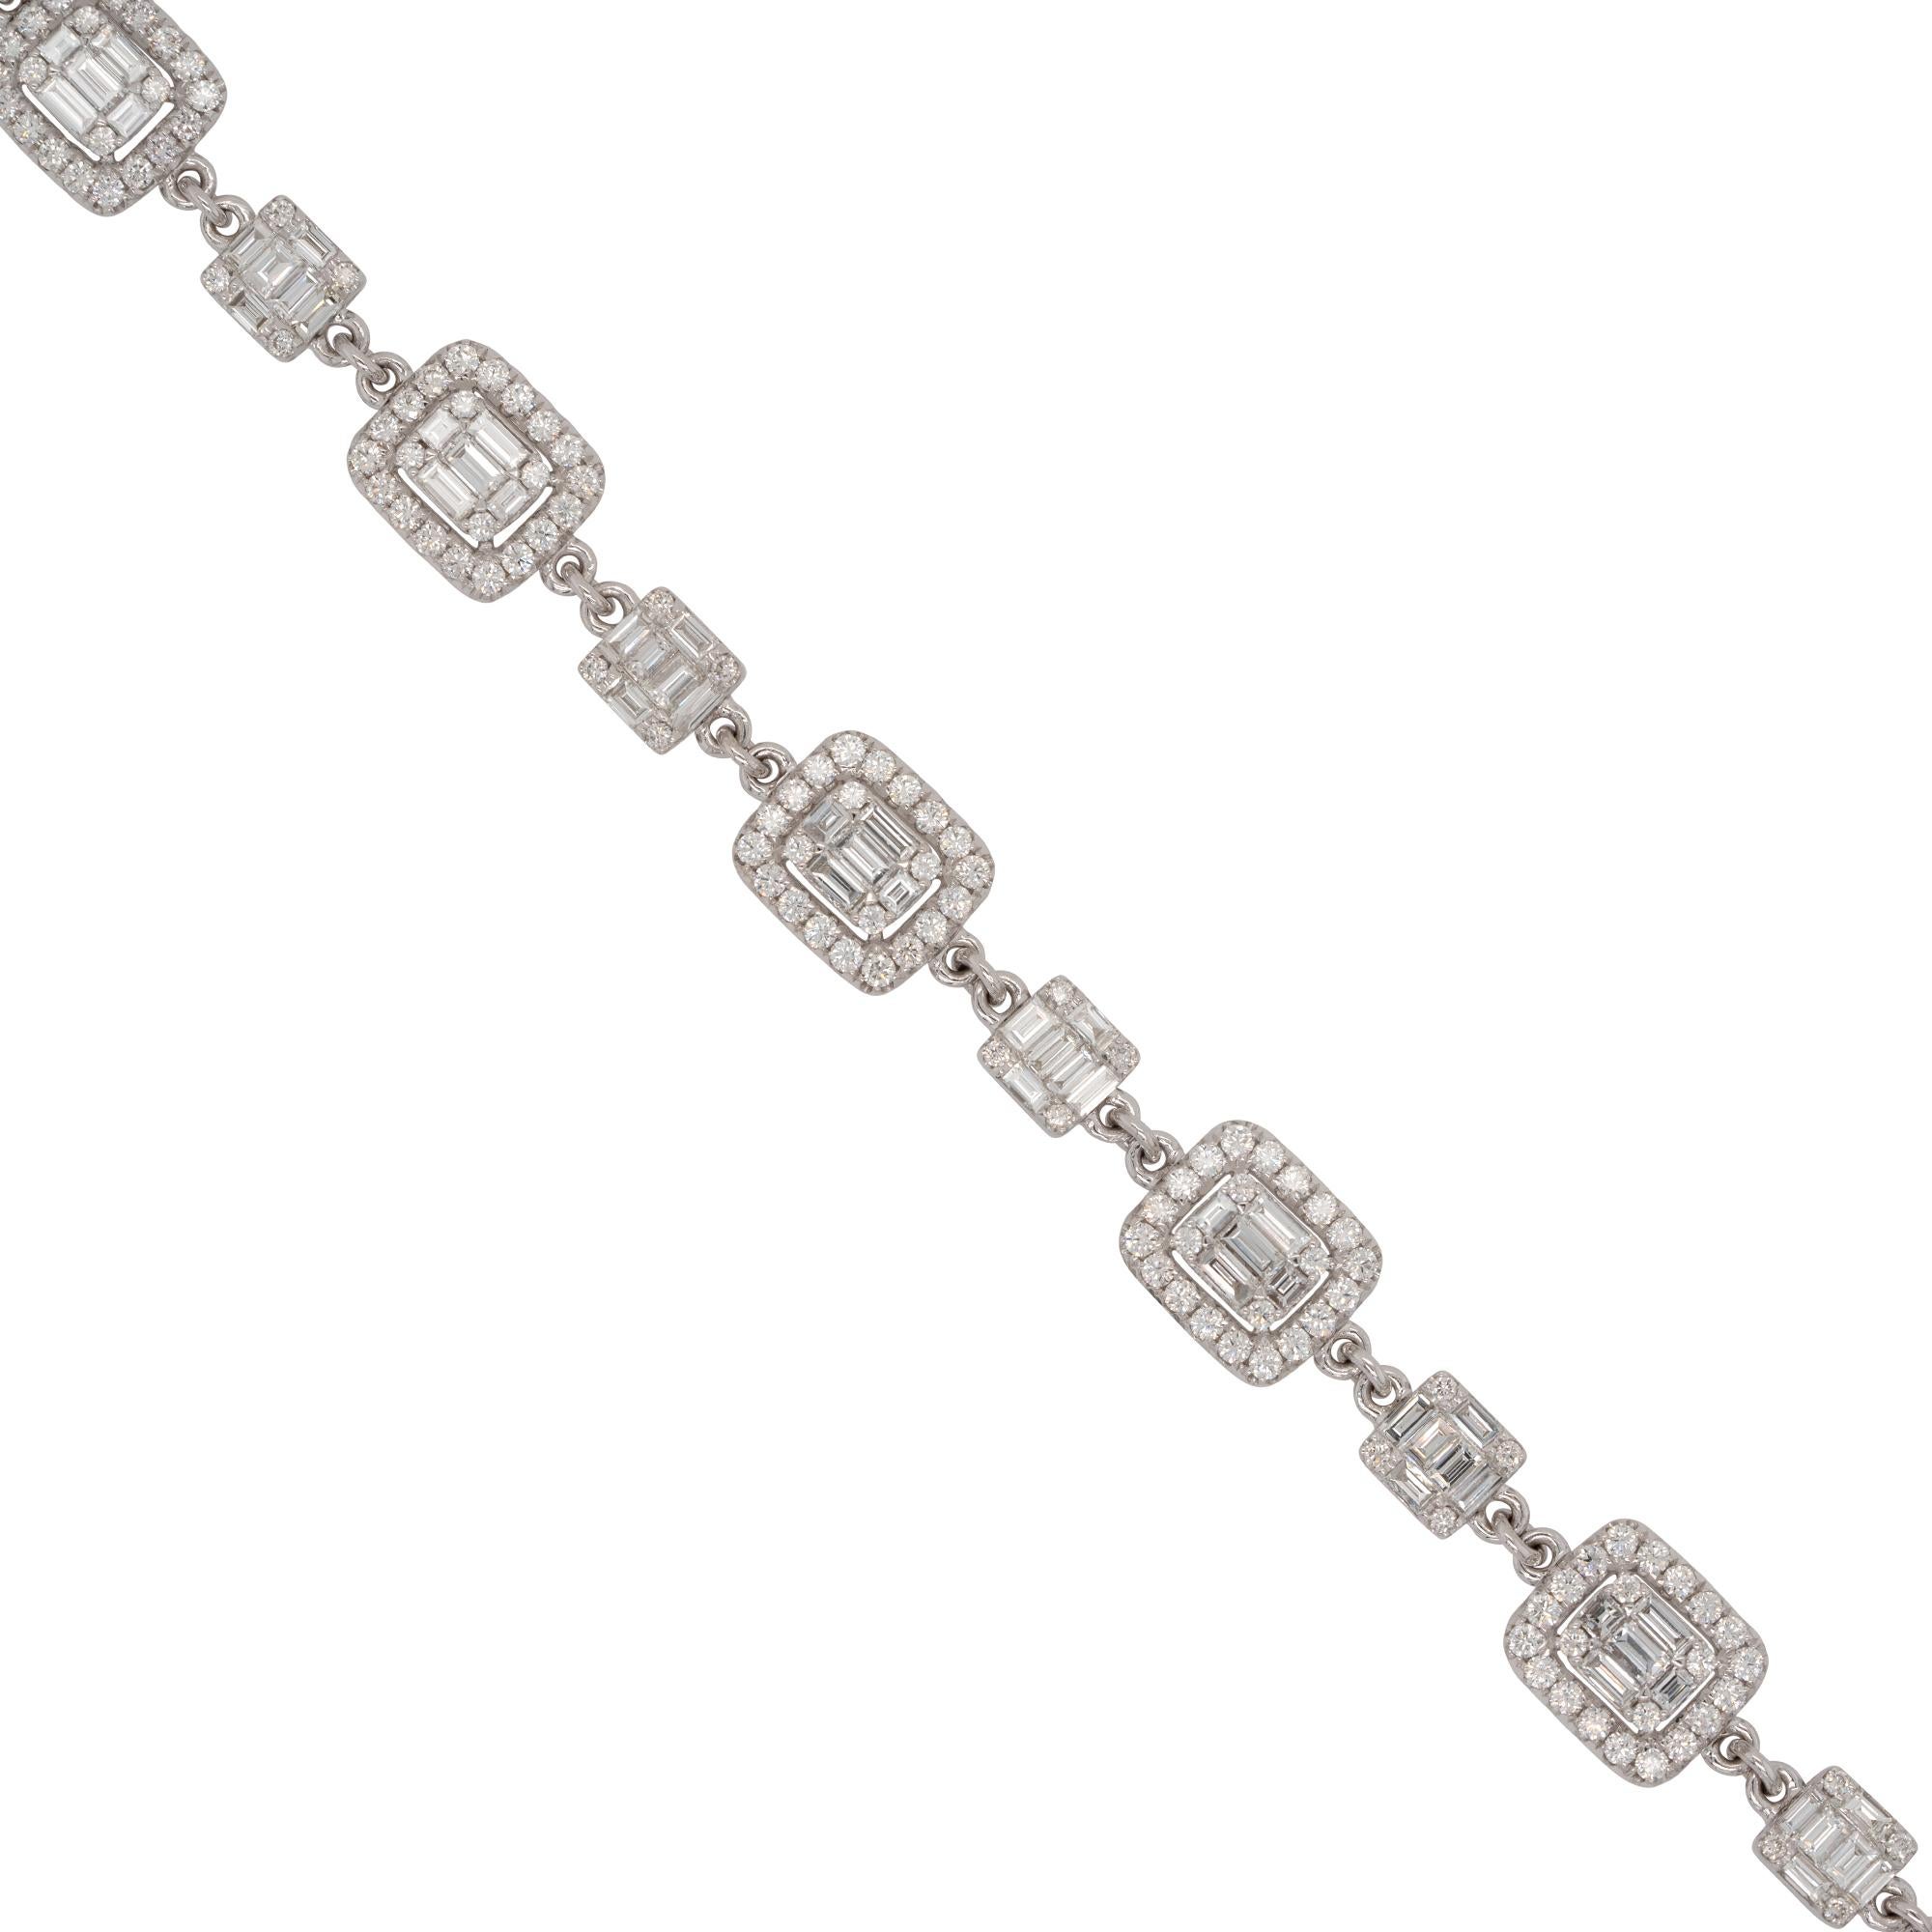 Material: 18k white gold
Diamond Details: Approx. 5.38ctw diamond baguette/round . Diamonds are G/H in color and VS in clarity
Bracelet Measurements: 7 inches in length
Total Weight: 16.5g (10.6dwt)
Additional Details: This item comes with a